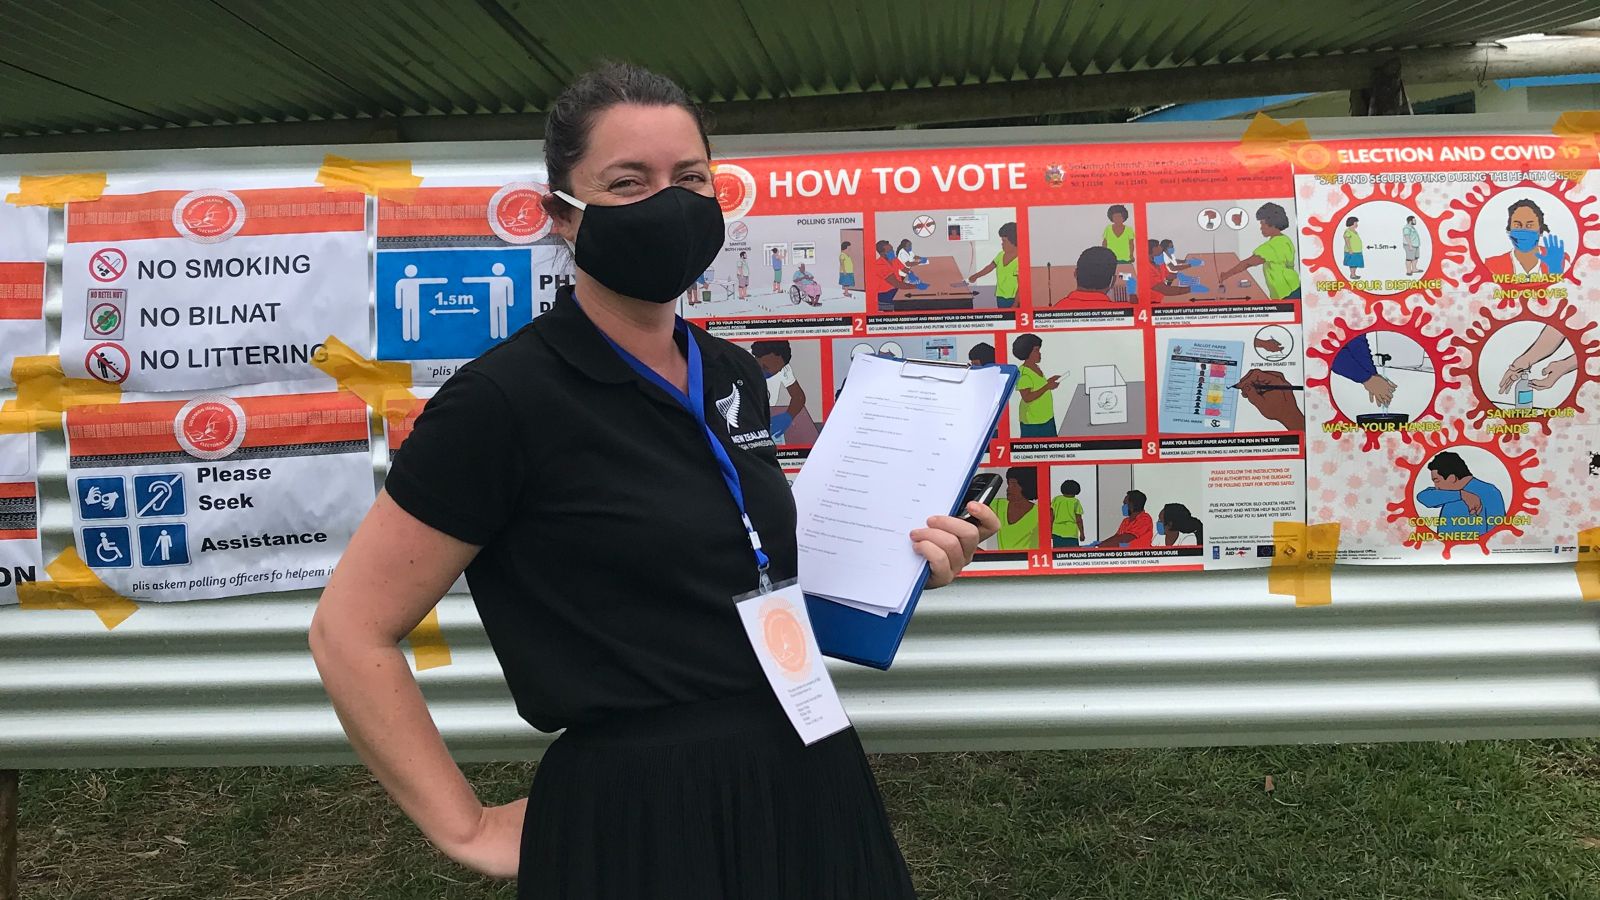 A photo of Hannah during an election monitoring mission in Solomon Islands. Hannah wears a black dress, a black face mask, and carries a clipboard.